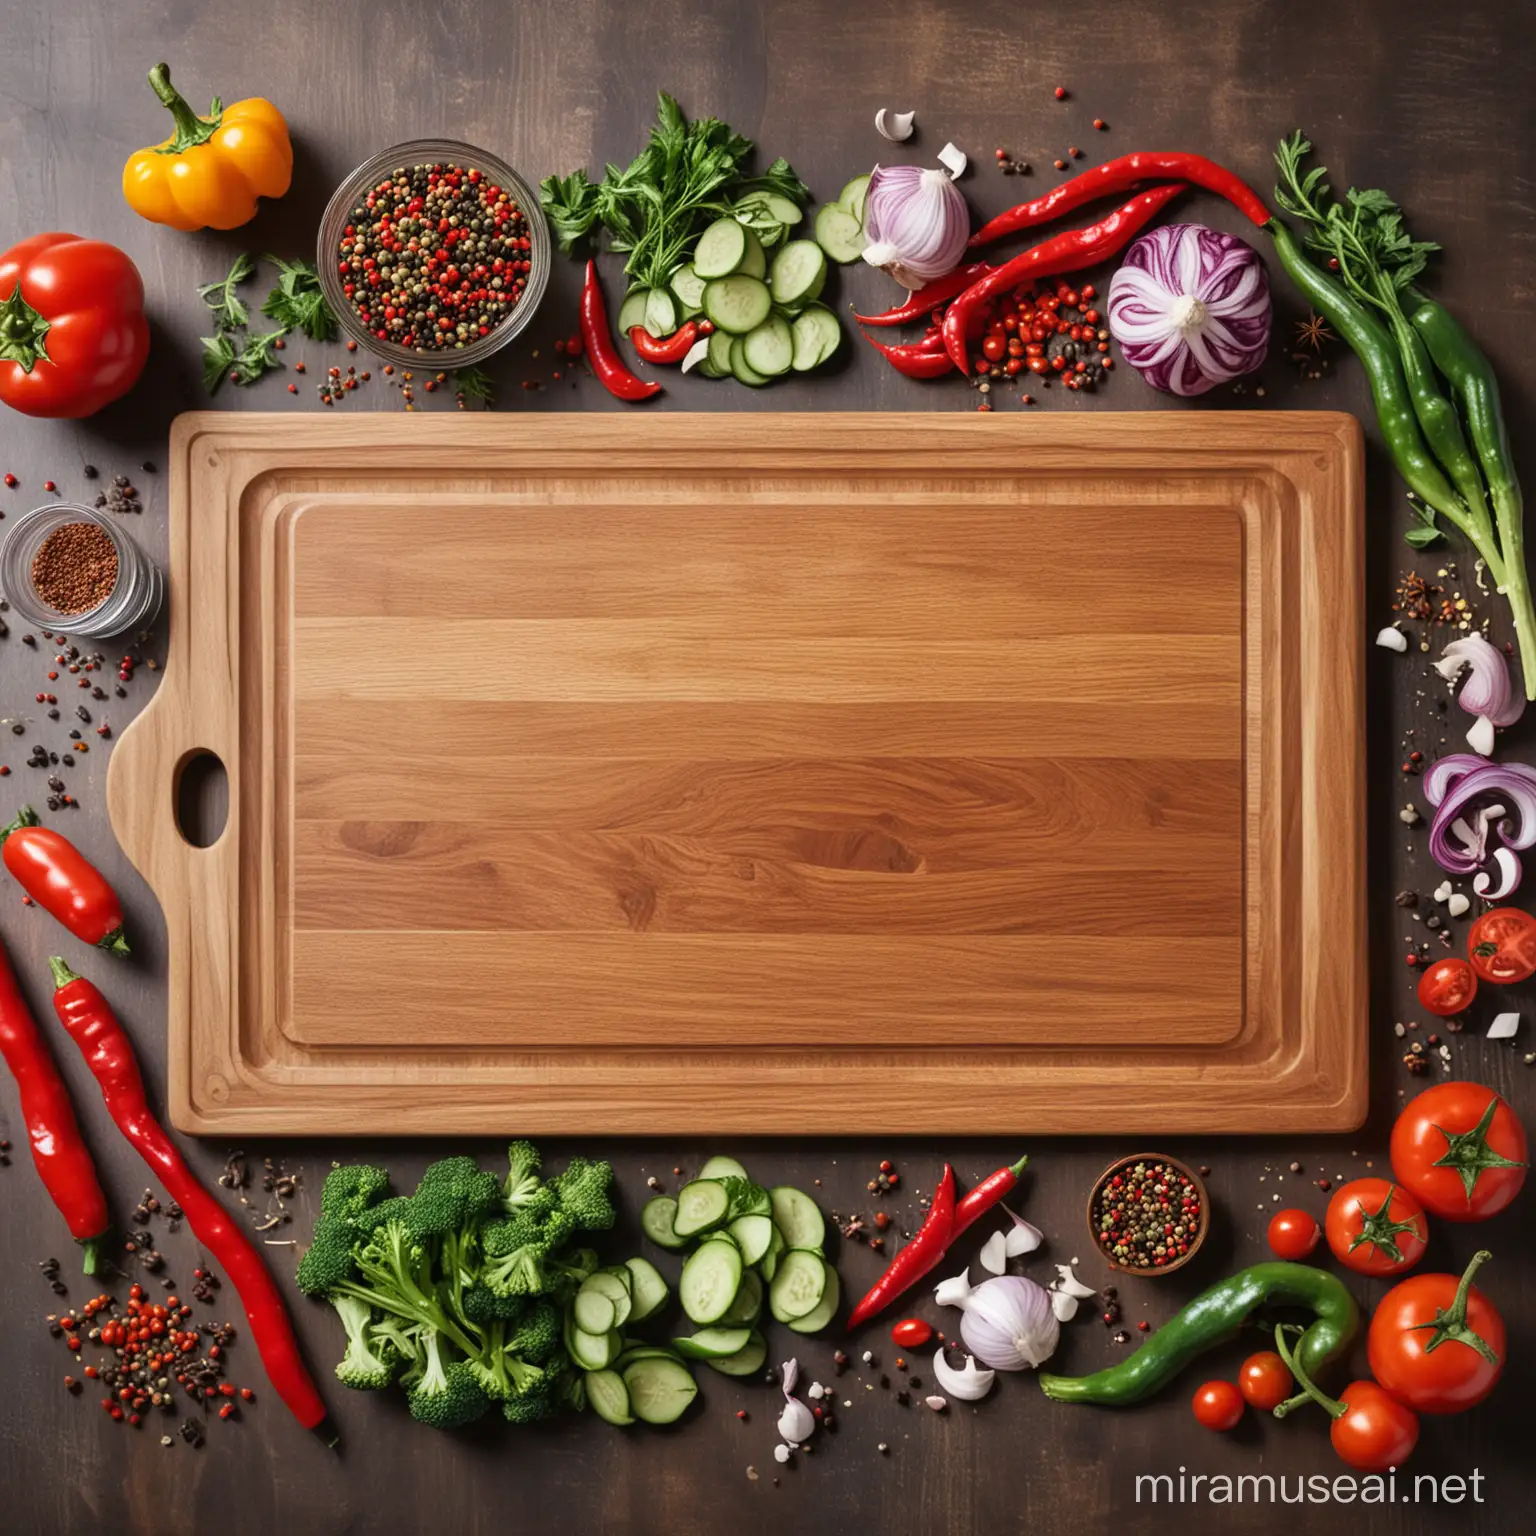 Rustic Wooden Chopping Board Surrounded by Fresh Vegetables and Spices